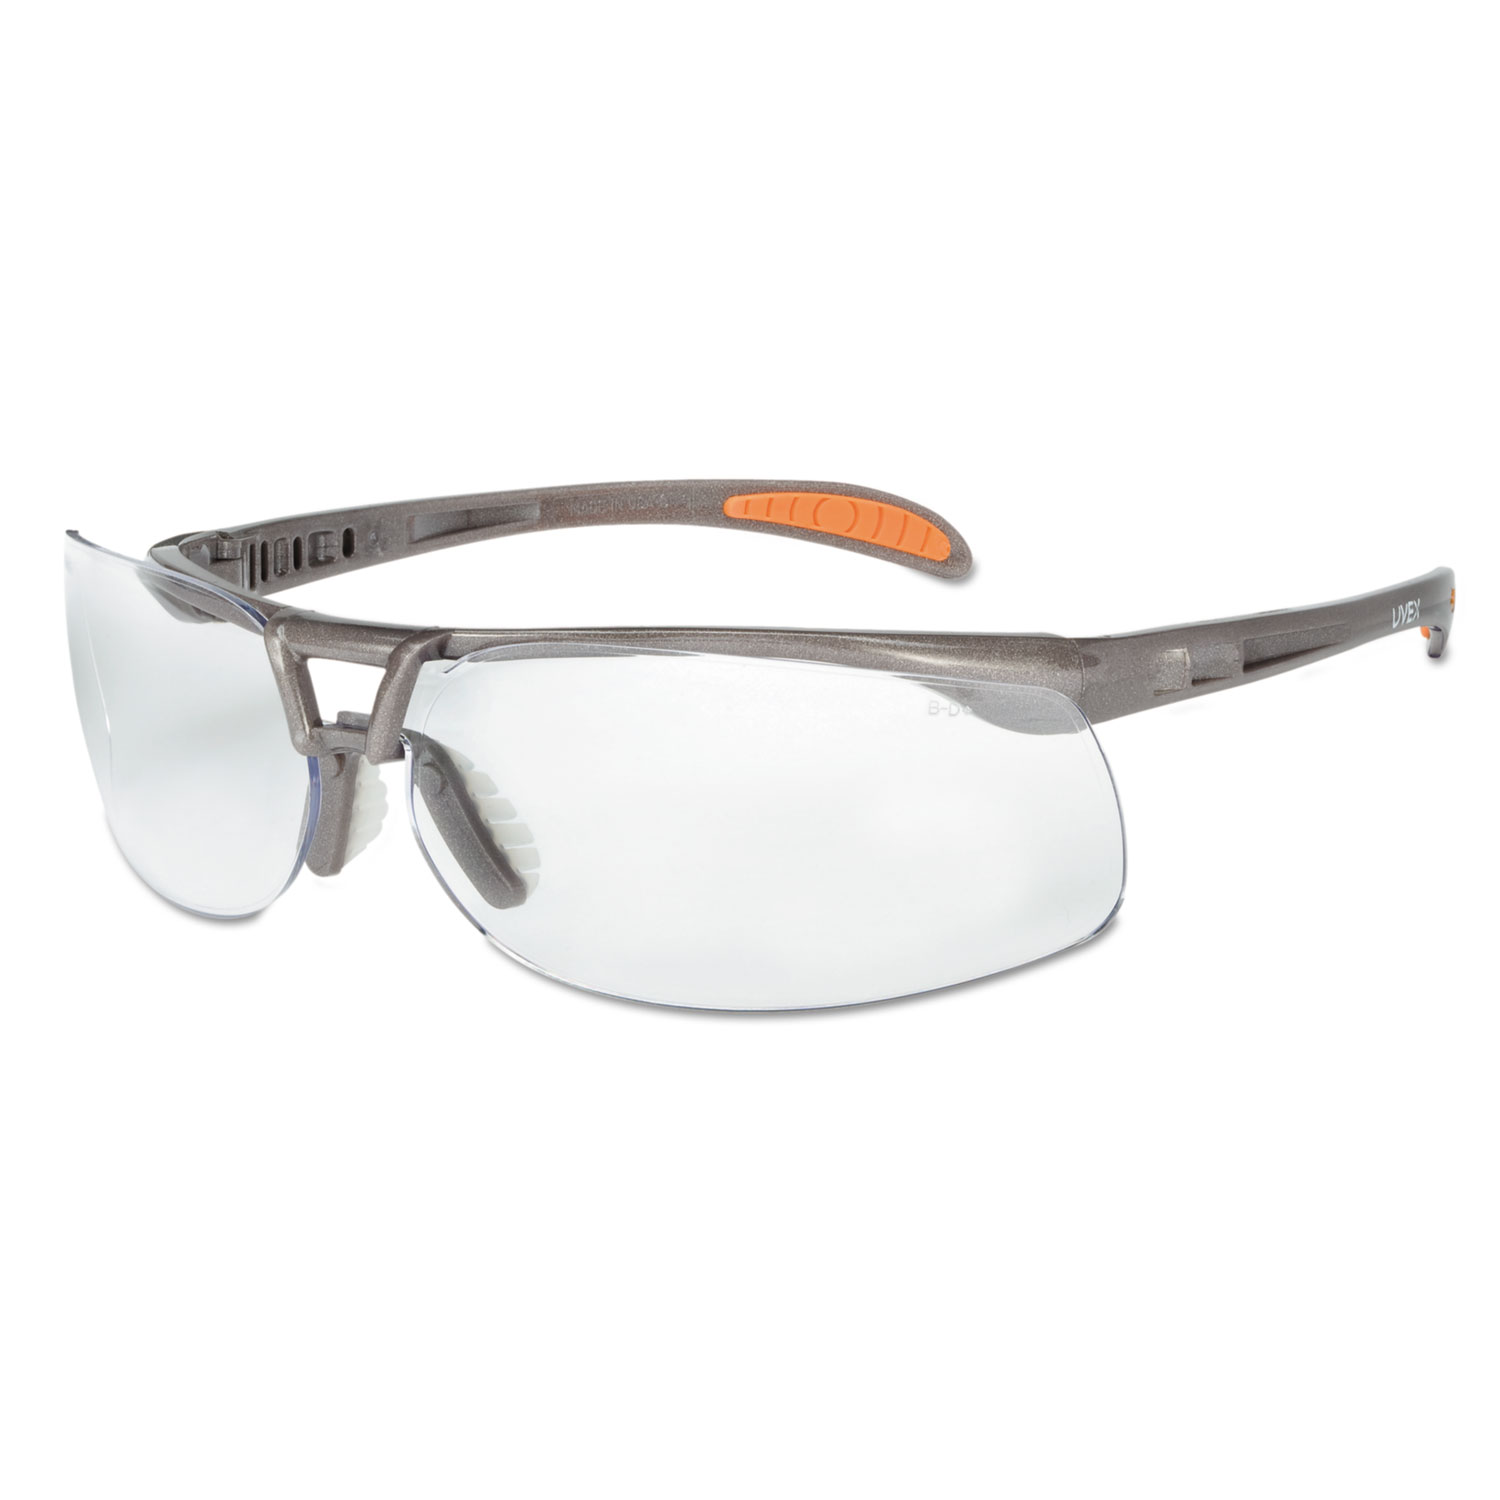  Honeywell Uvex S4210 Protege Safety Glasses, Ultra-dura Anti-Scratch, Sandstone Frame, Clear Lens (UVXS4210EA) 